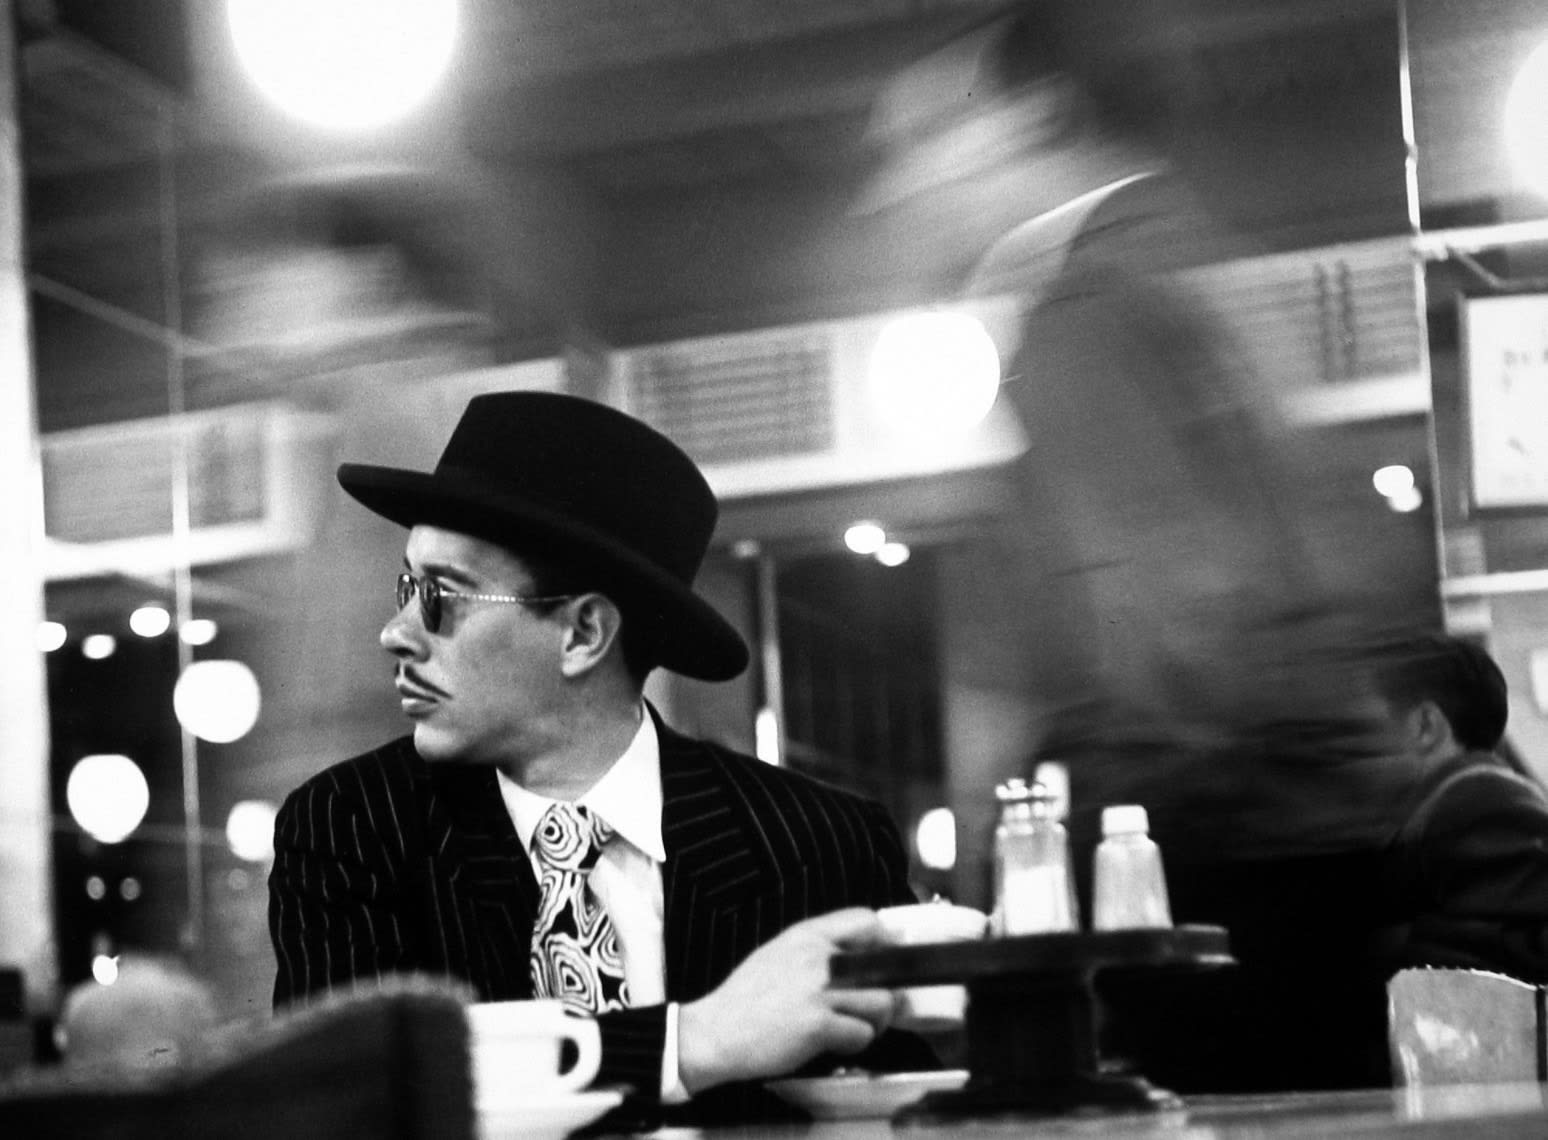 Ted Croner, Sharpie in Cafeteria, New York, 1946